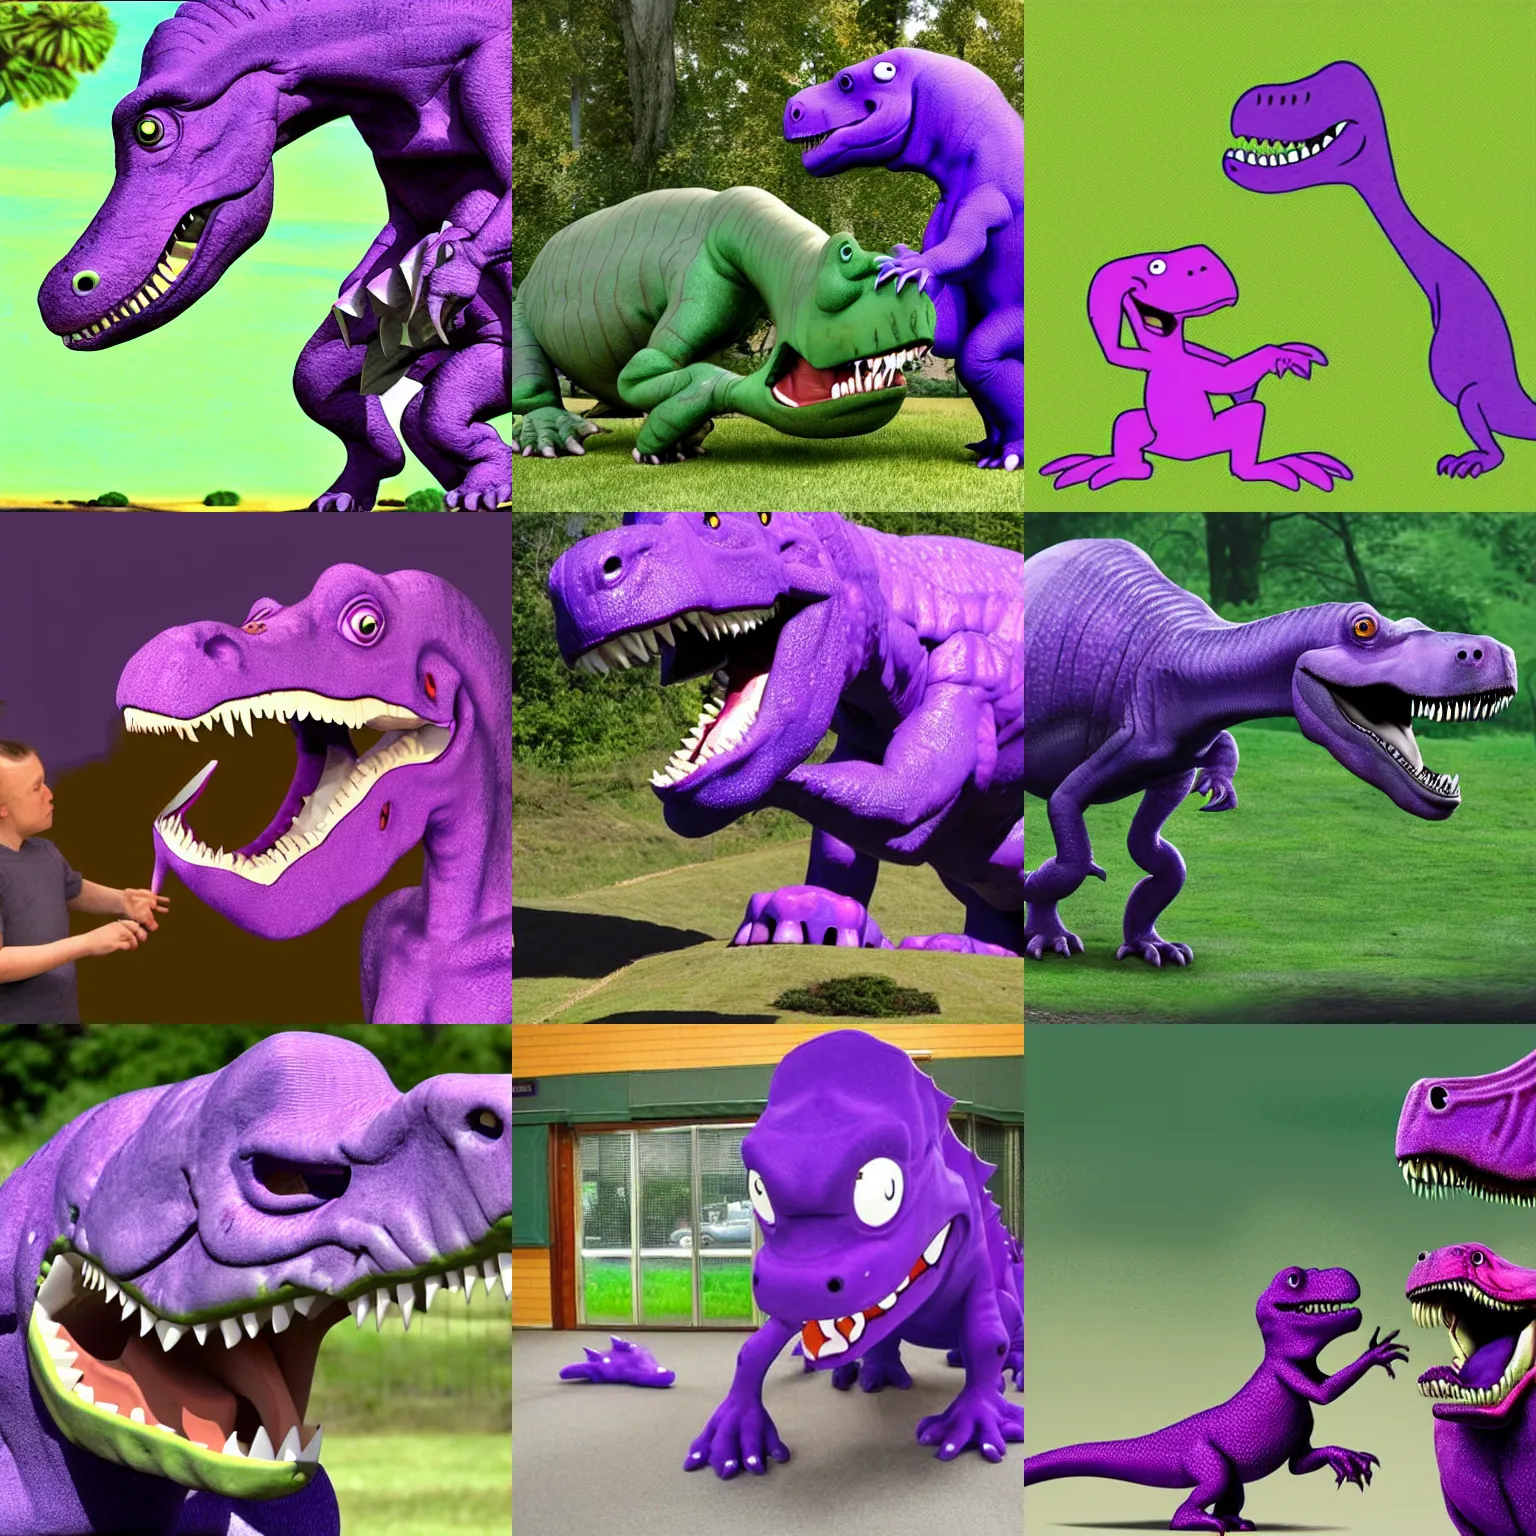 Prompt: barney the purple dinosaur is being eaten by a tyrannosaurus rex